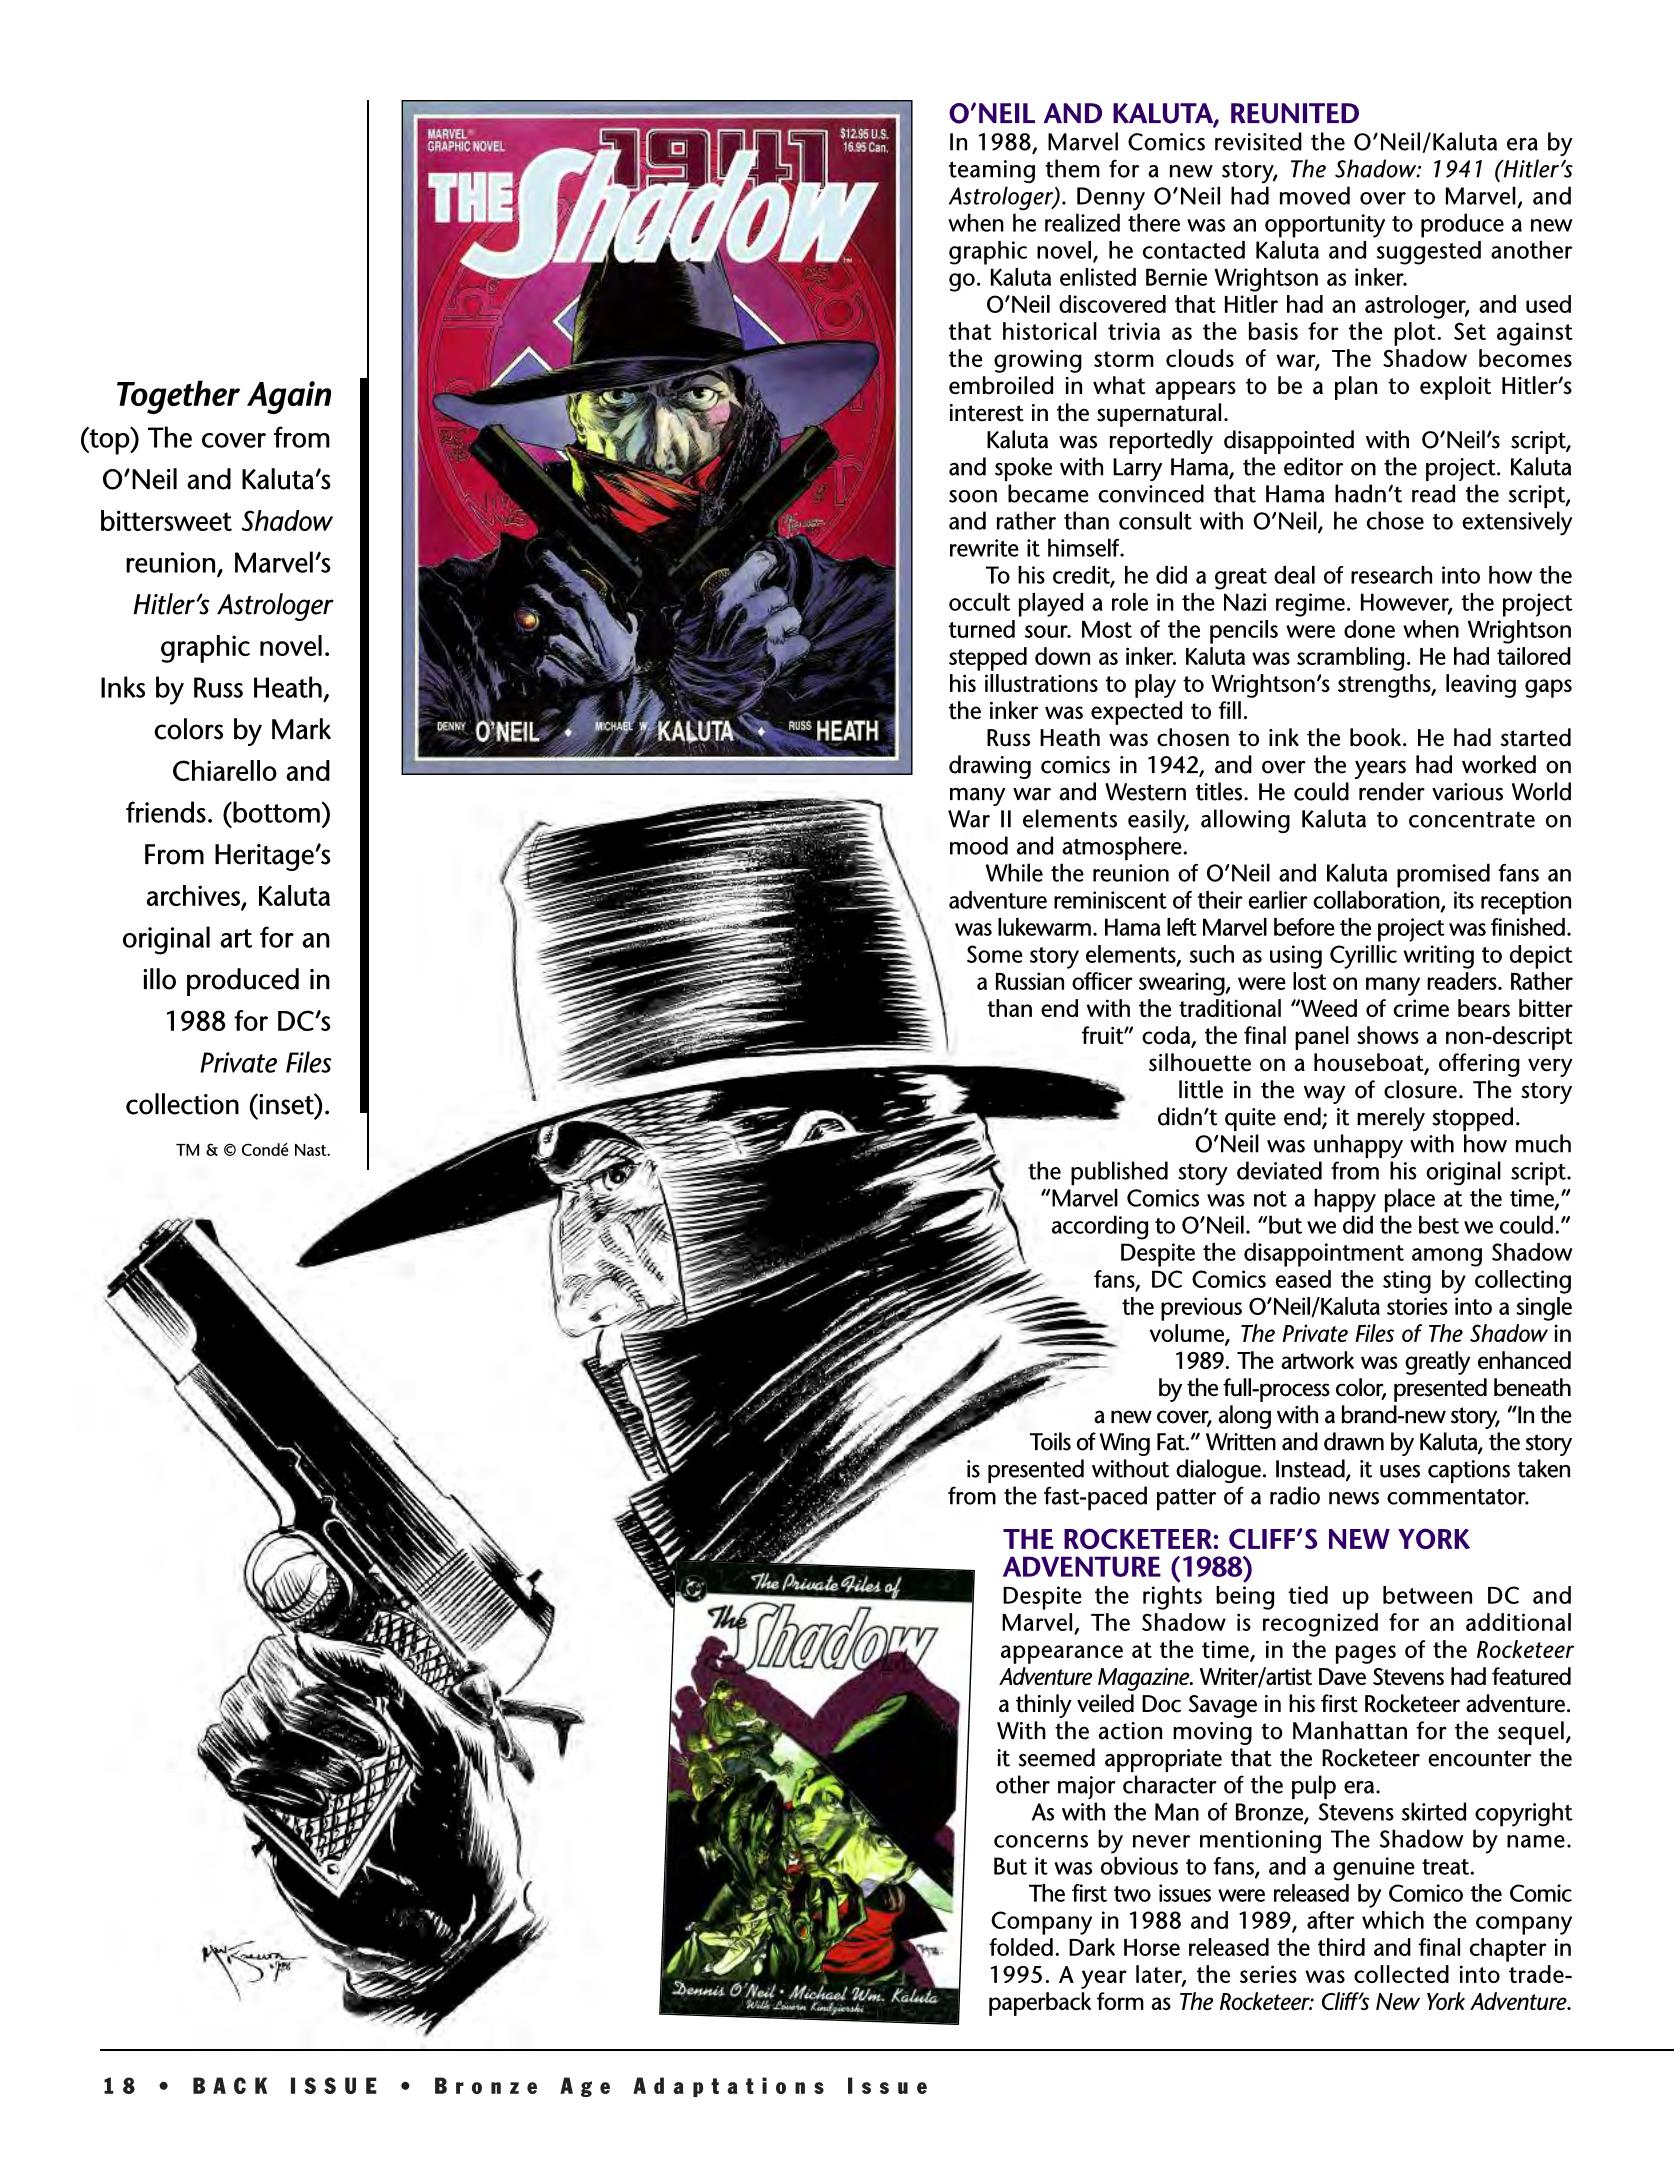 Read online Back Issue comic -  Issue #89 - 13